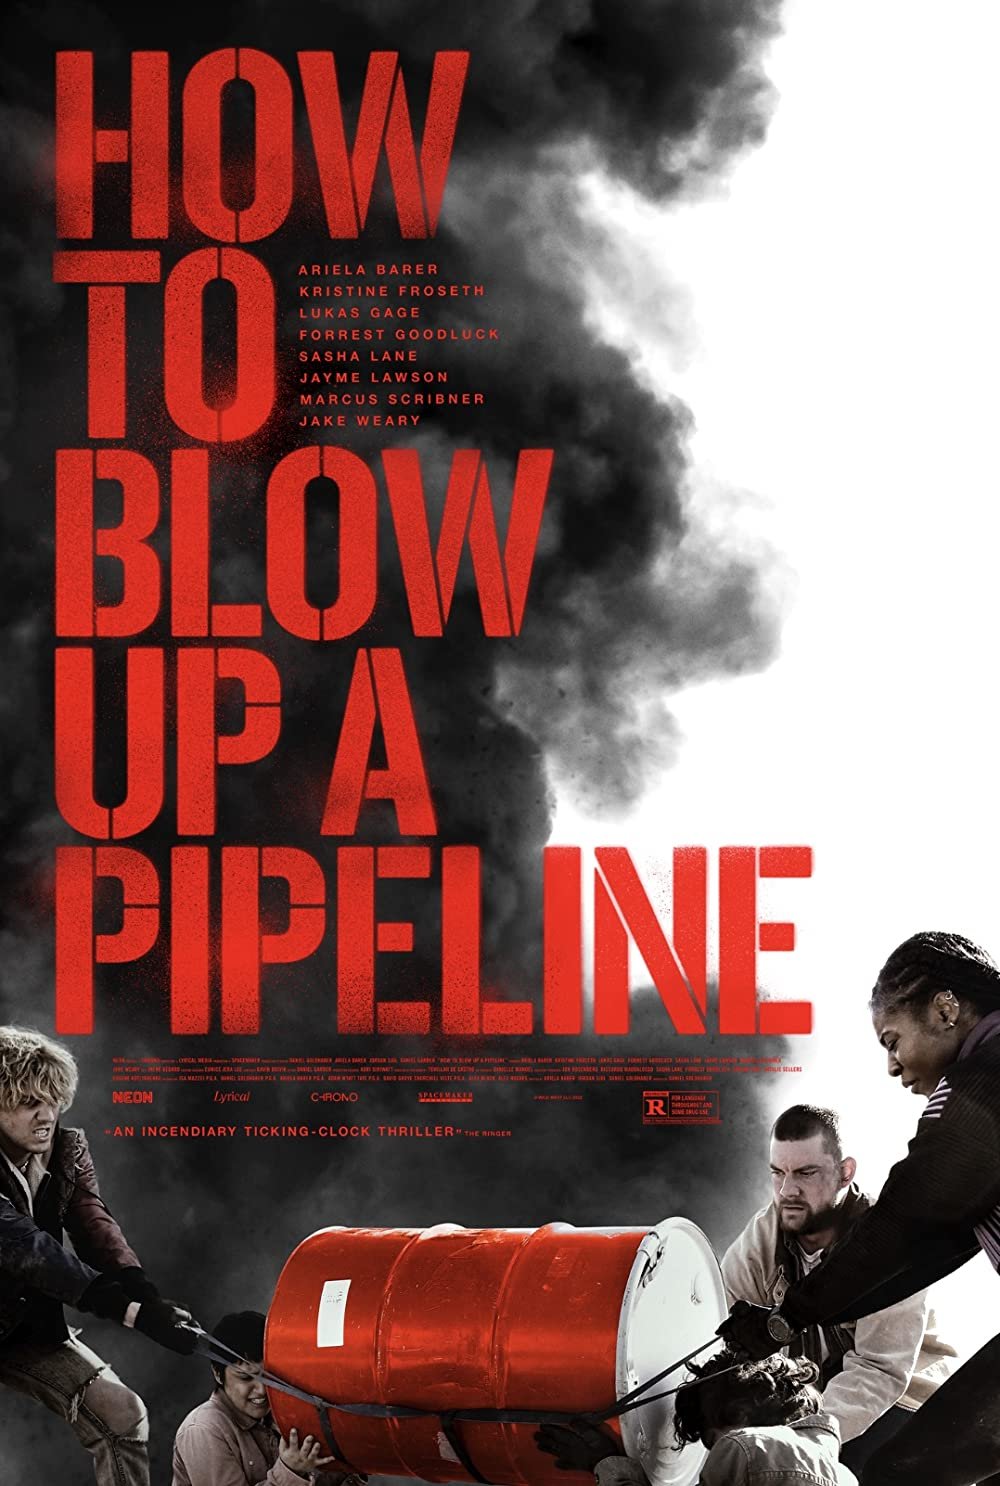 How To Blow Up A Pipeline images © Neon